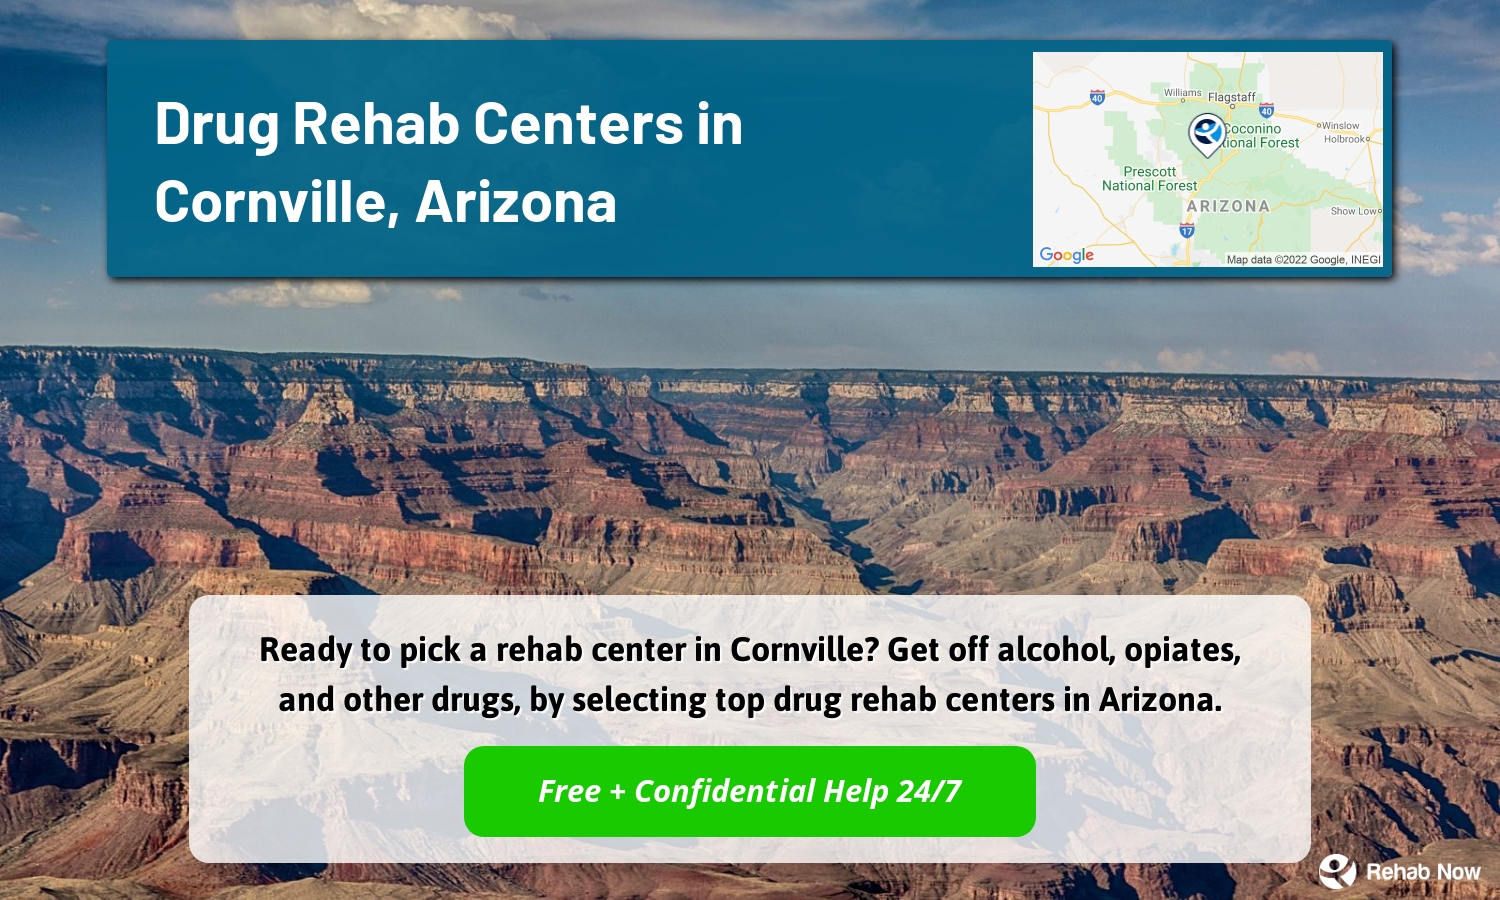 Ready to pick a rehab center in Cornville? Get off alcohol, opiates, and other drugs, by selecting top drug rehab centers in Arizona.